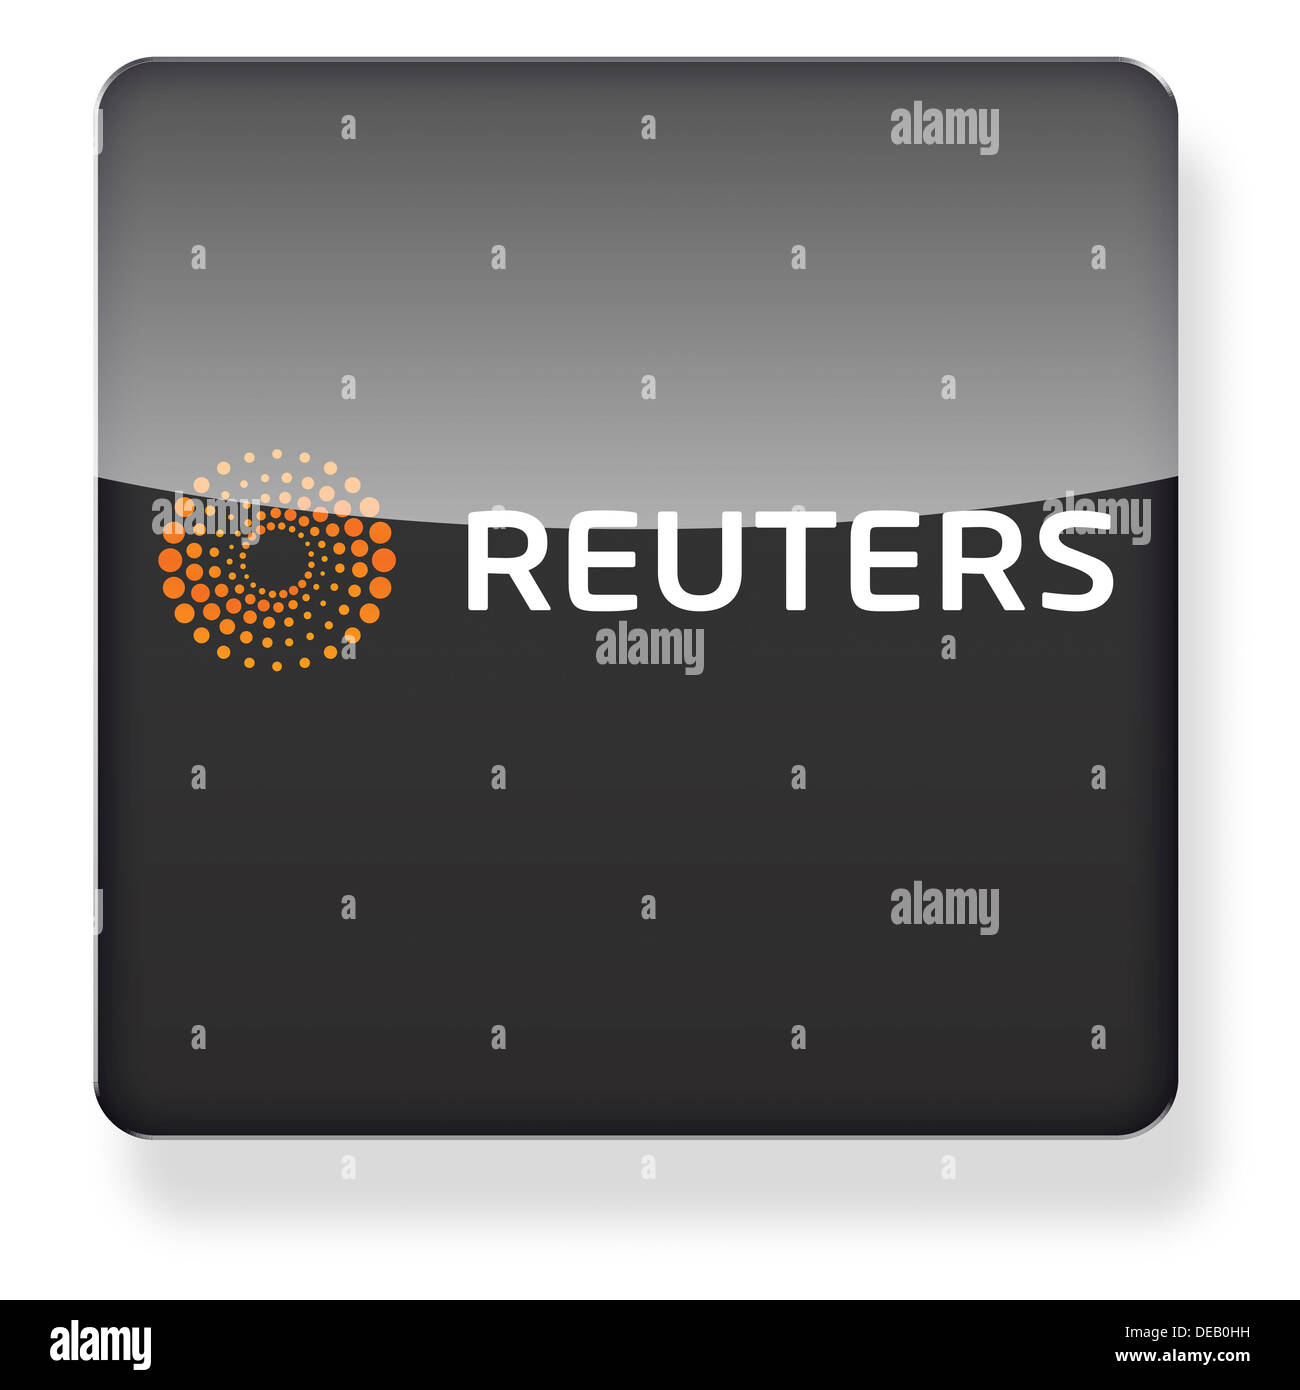 Reuters logo as an app icon. Clipping path included. Stock Photo